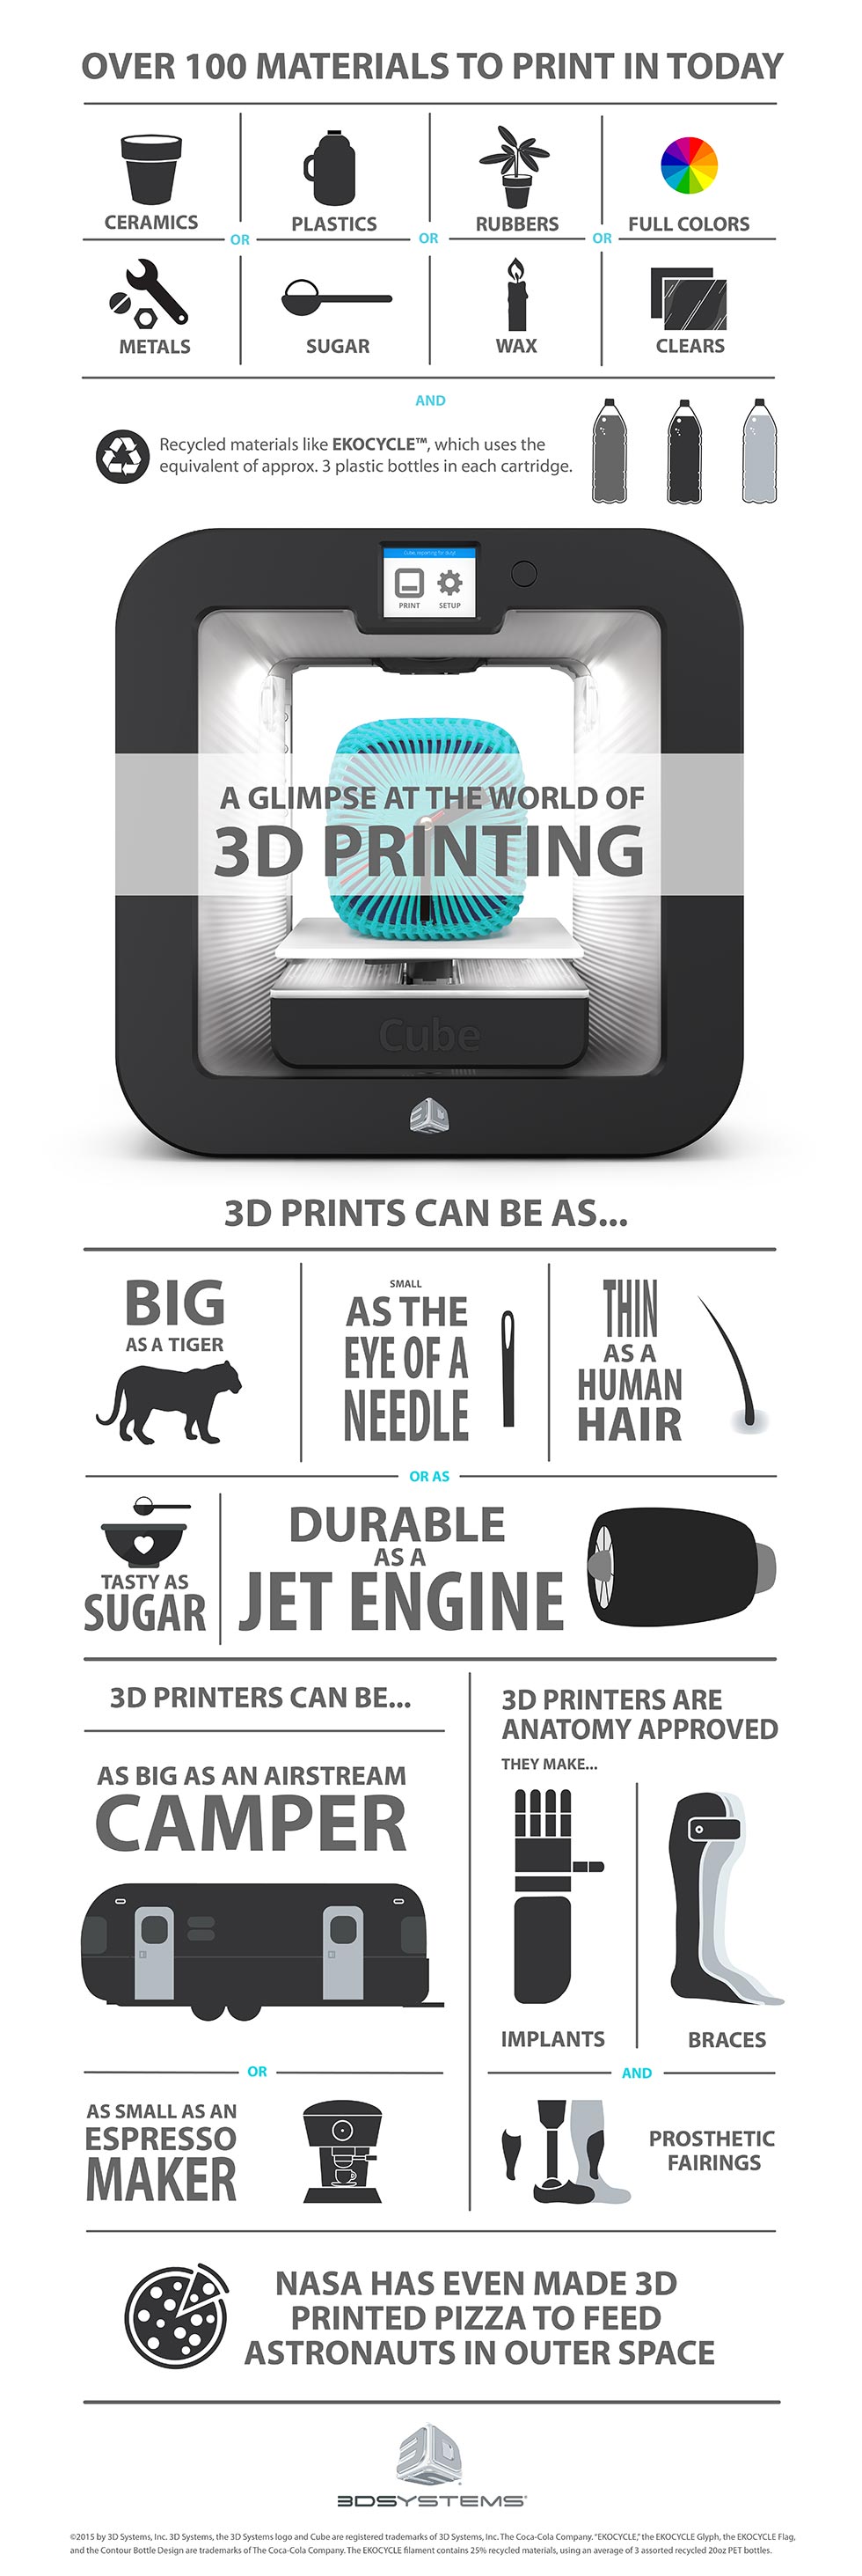 Custom Prosthetics Are Possible with the Latest 3D Printers [Infographic]